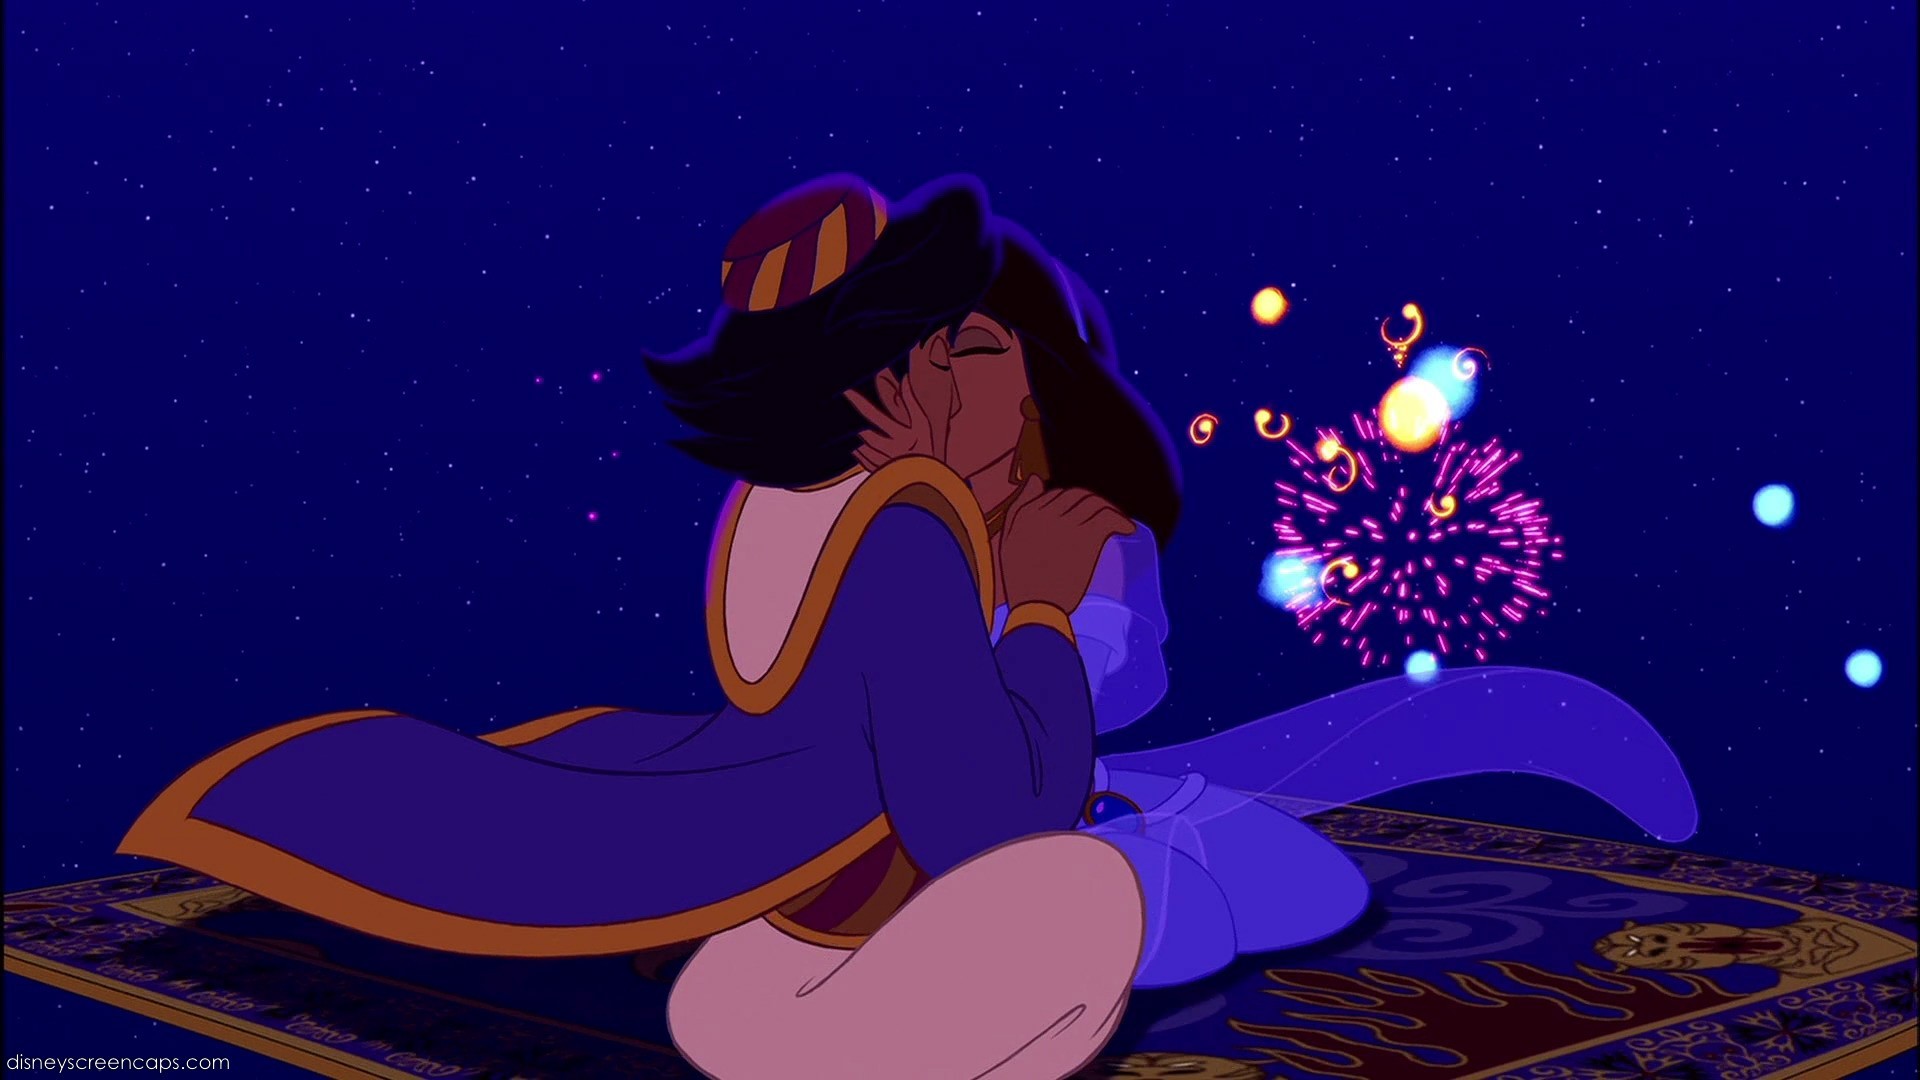 Is Aladdin And Jasmine Your Most Favorite Disney Couple Poll Results Aladdin And Jasmine Fanpop 